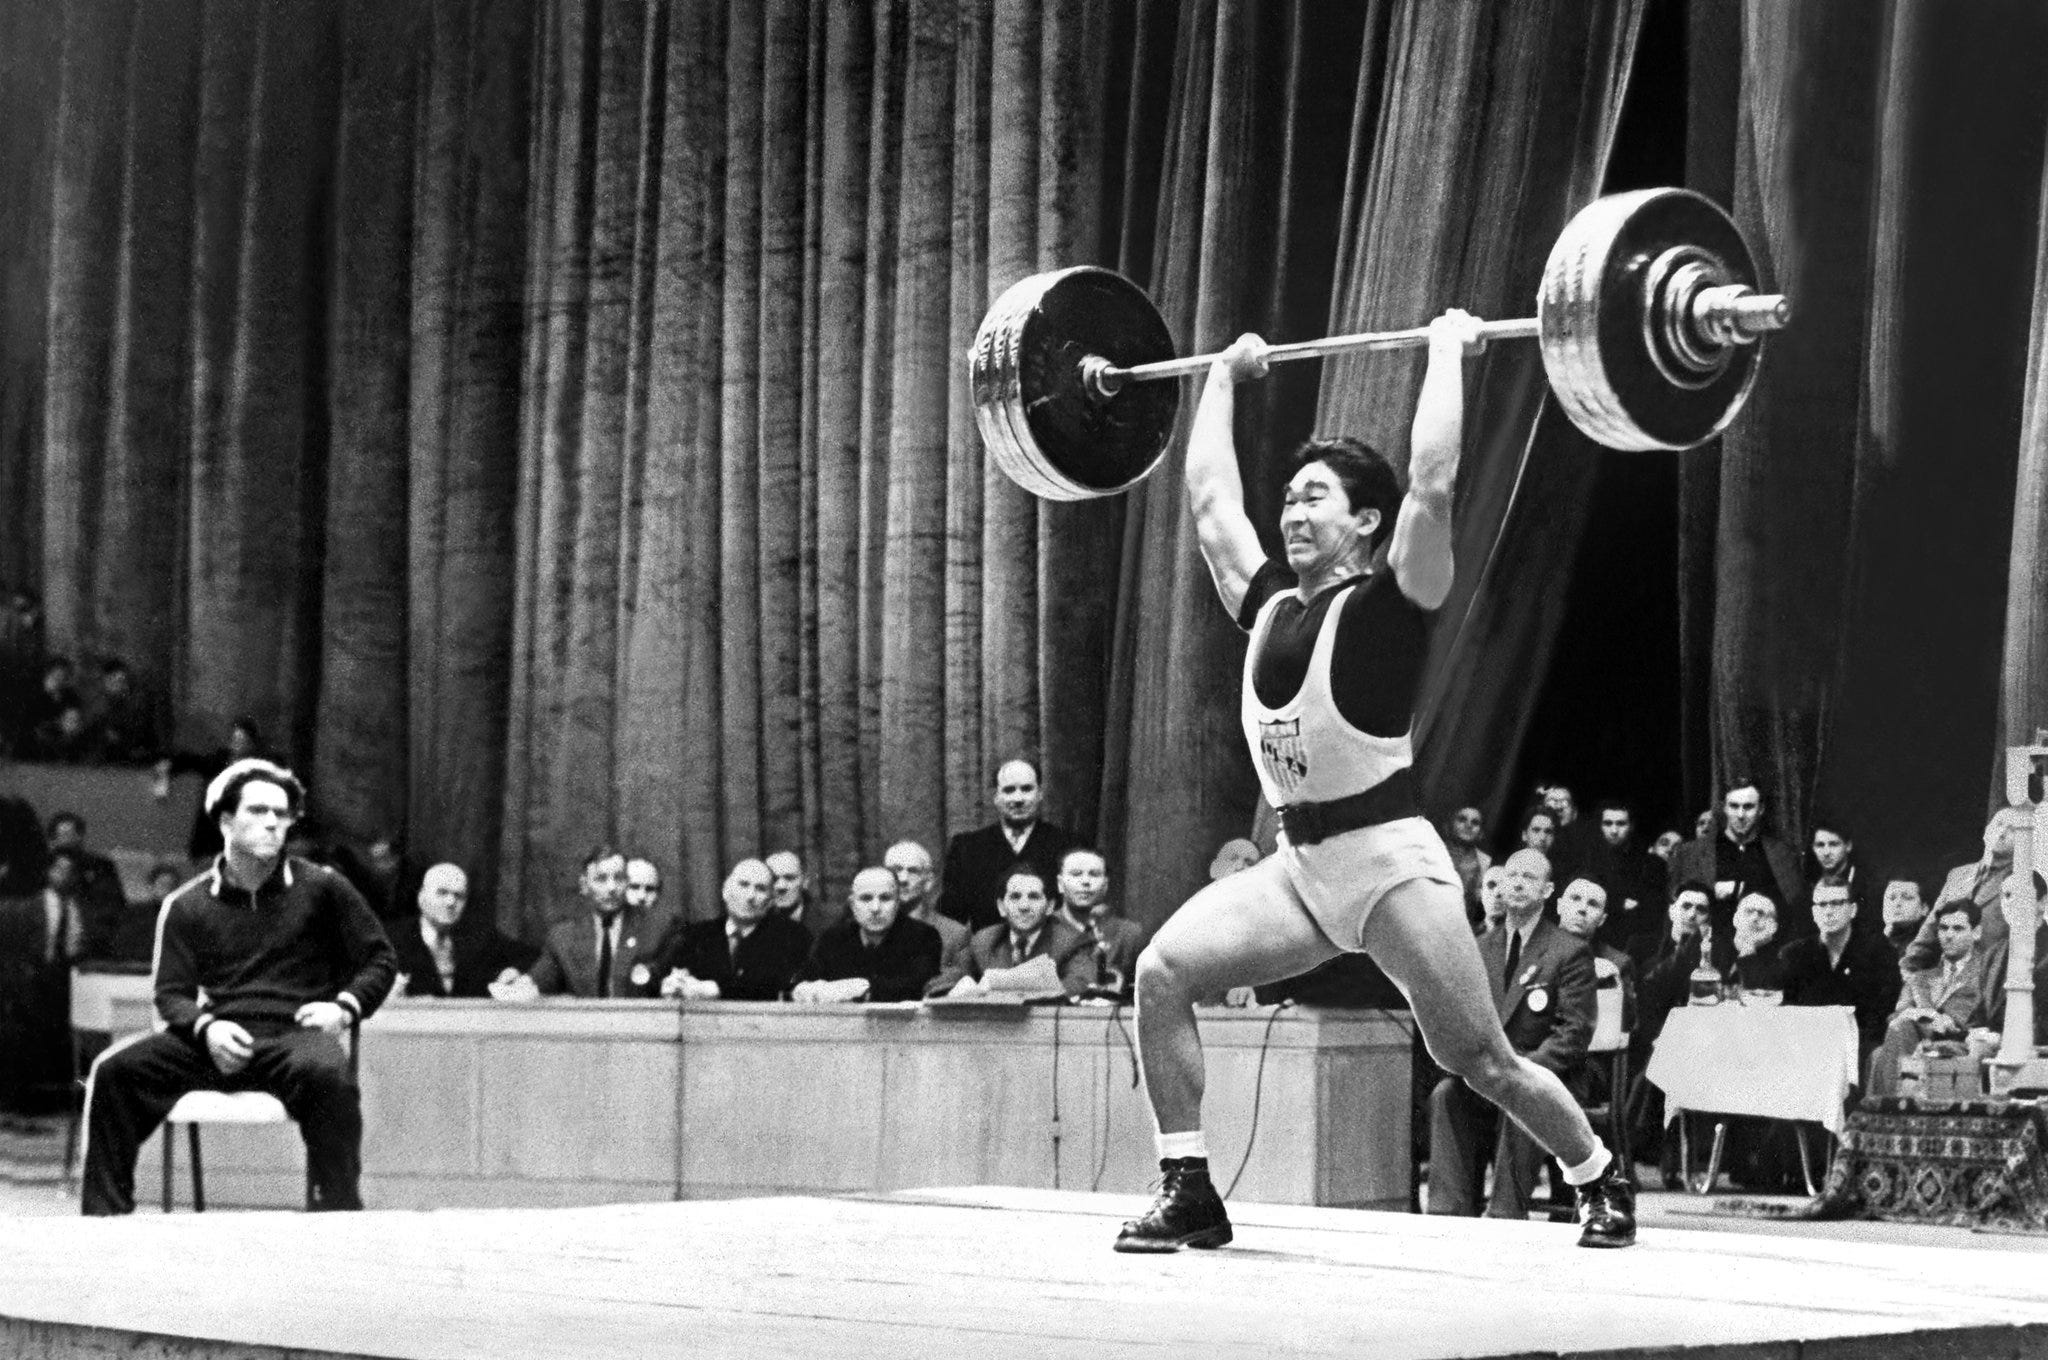 Tommy Kono, Weight-Lifting Champion Raised in Internment Camp, Dies at 85 -  The New York Times